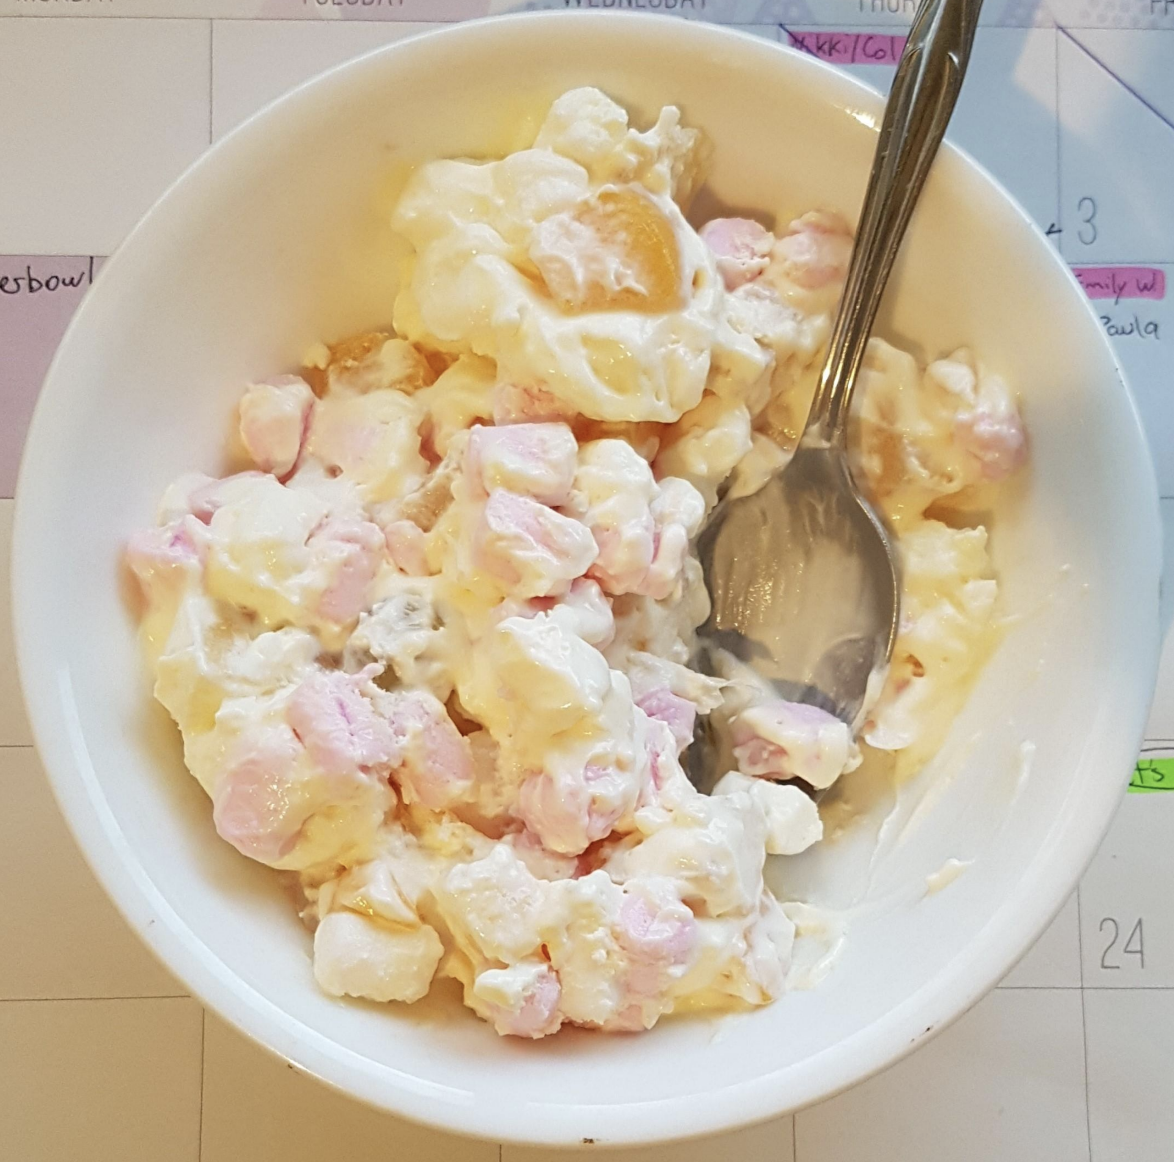 Bowl of fruit salad with creamy dressing and a spoon on a paper calendar background